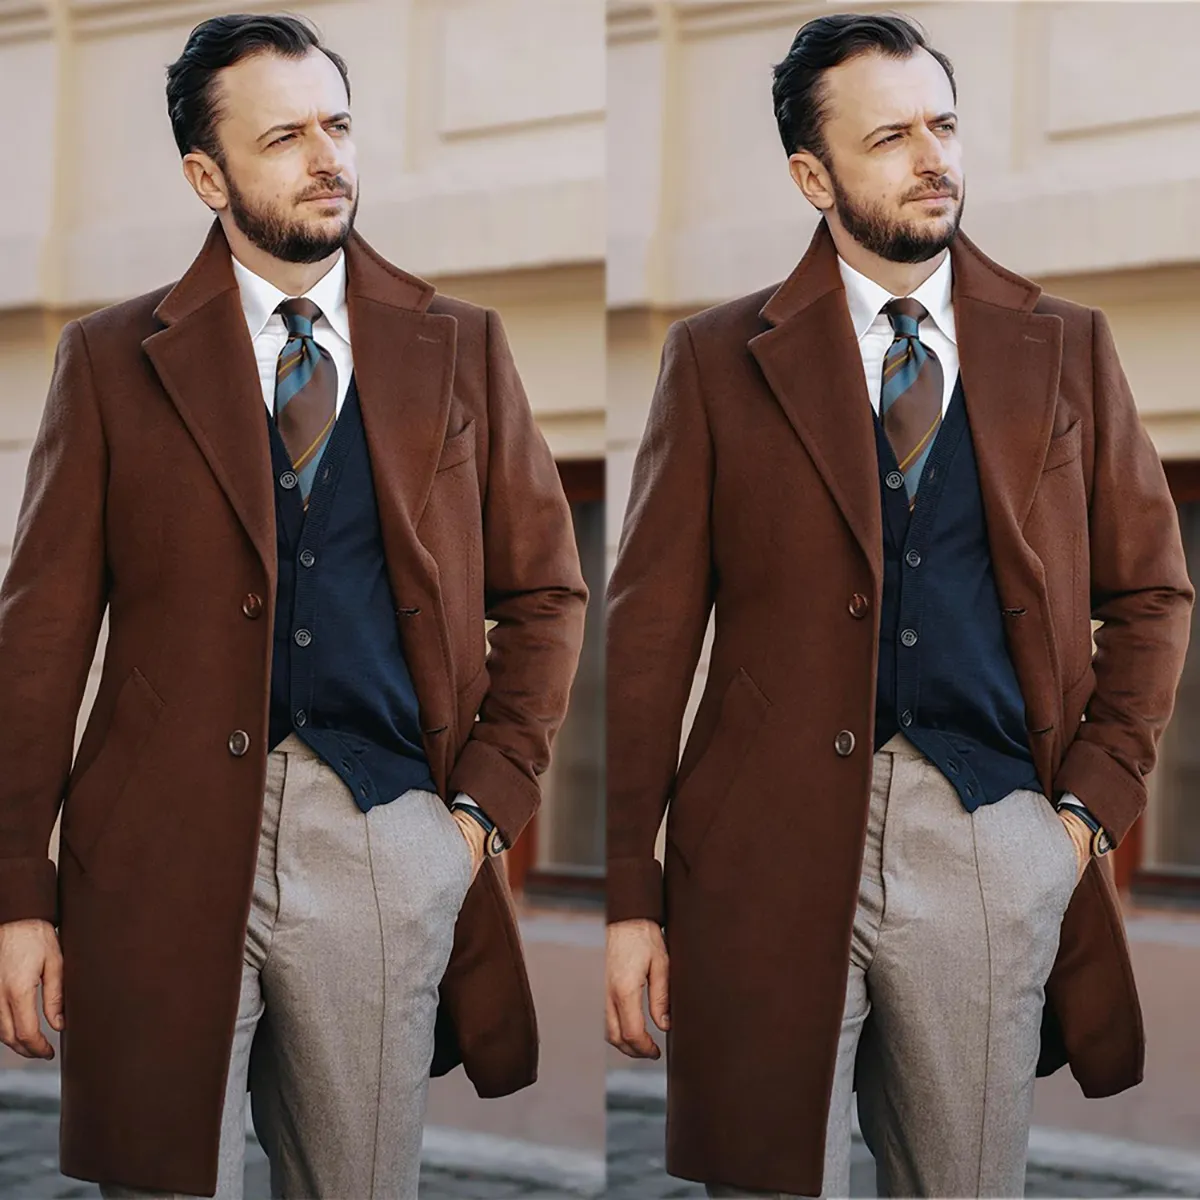 Inverno Uomo Smoking di lana Cappotti Giacca lunga Caffè Sposo Party Prom Coat Business Wear Outfit One Piece